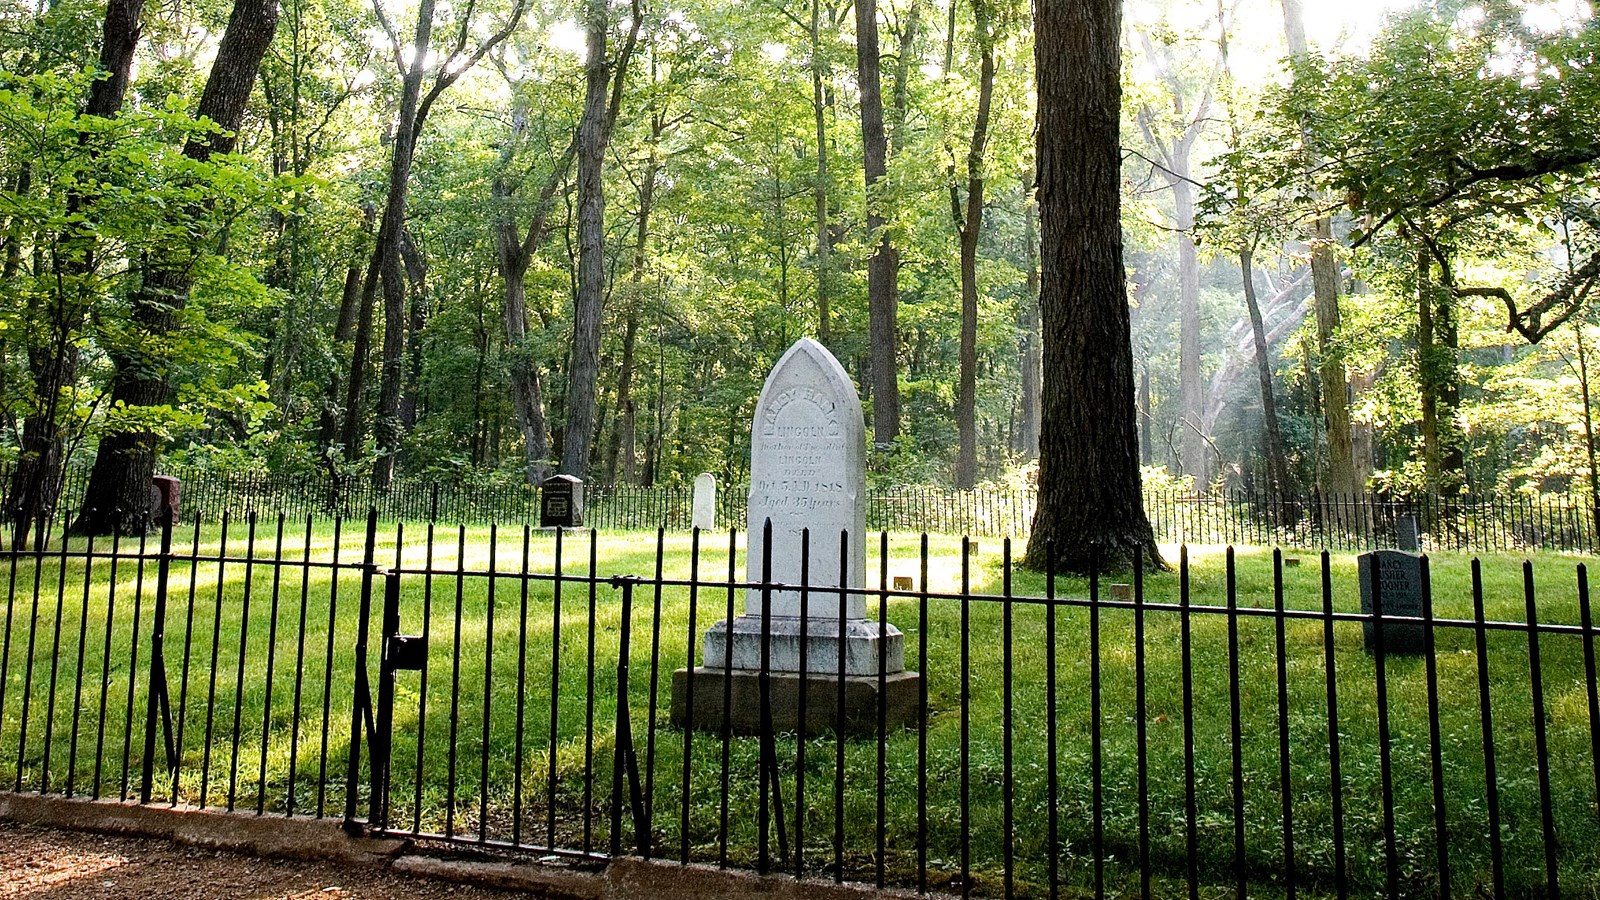 Cemetery with iron fence. Dappled light through trees.